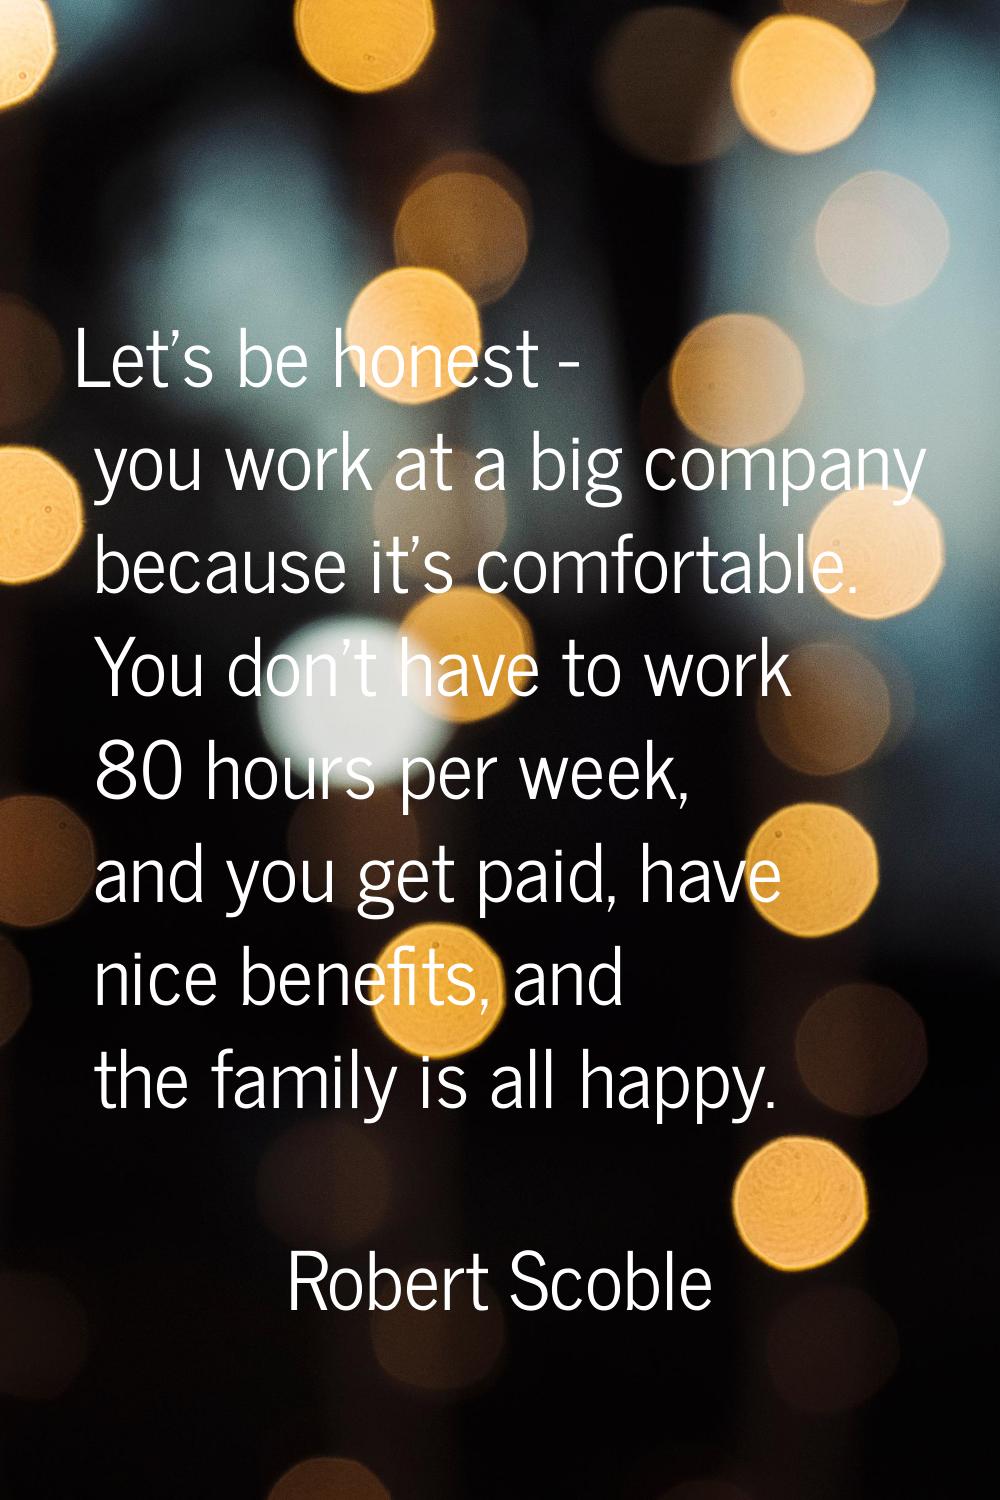 Let's be honest - you work at a big company because it's comfortable. You don't have to work 80 hou